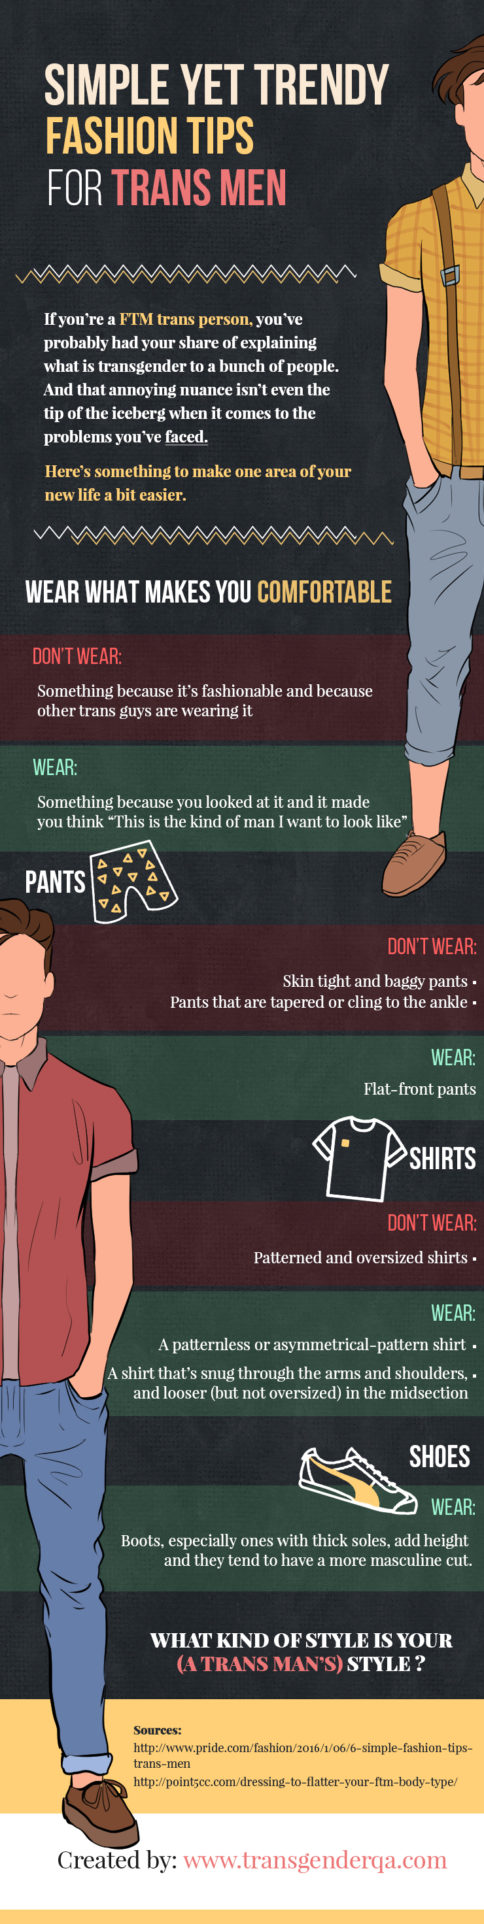 Simple Yet Trendy Fashion Tips for Trans Men